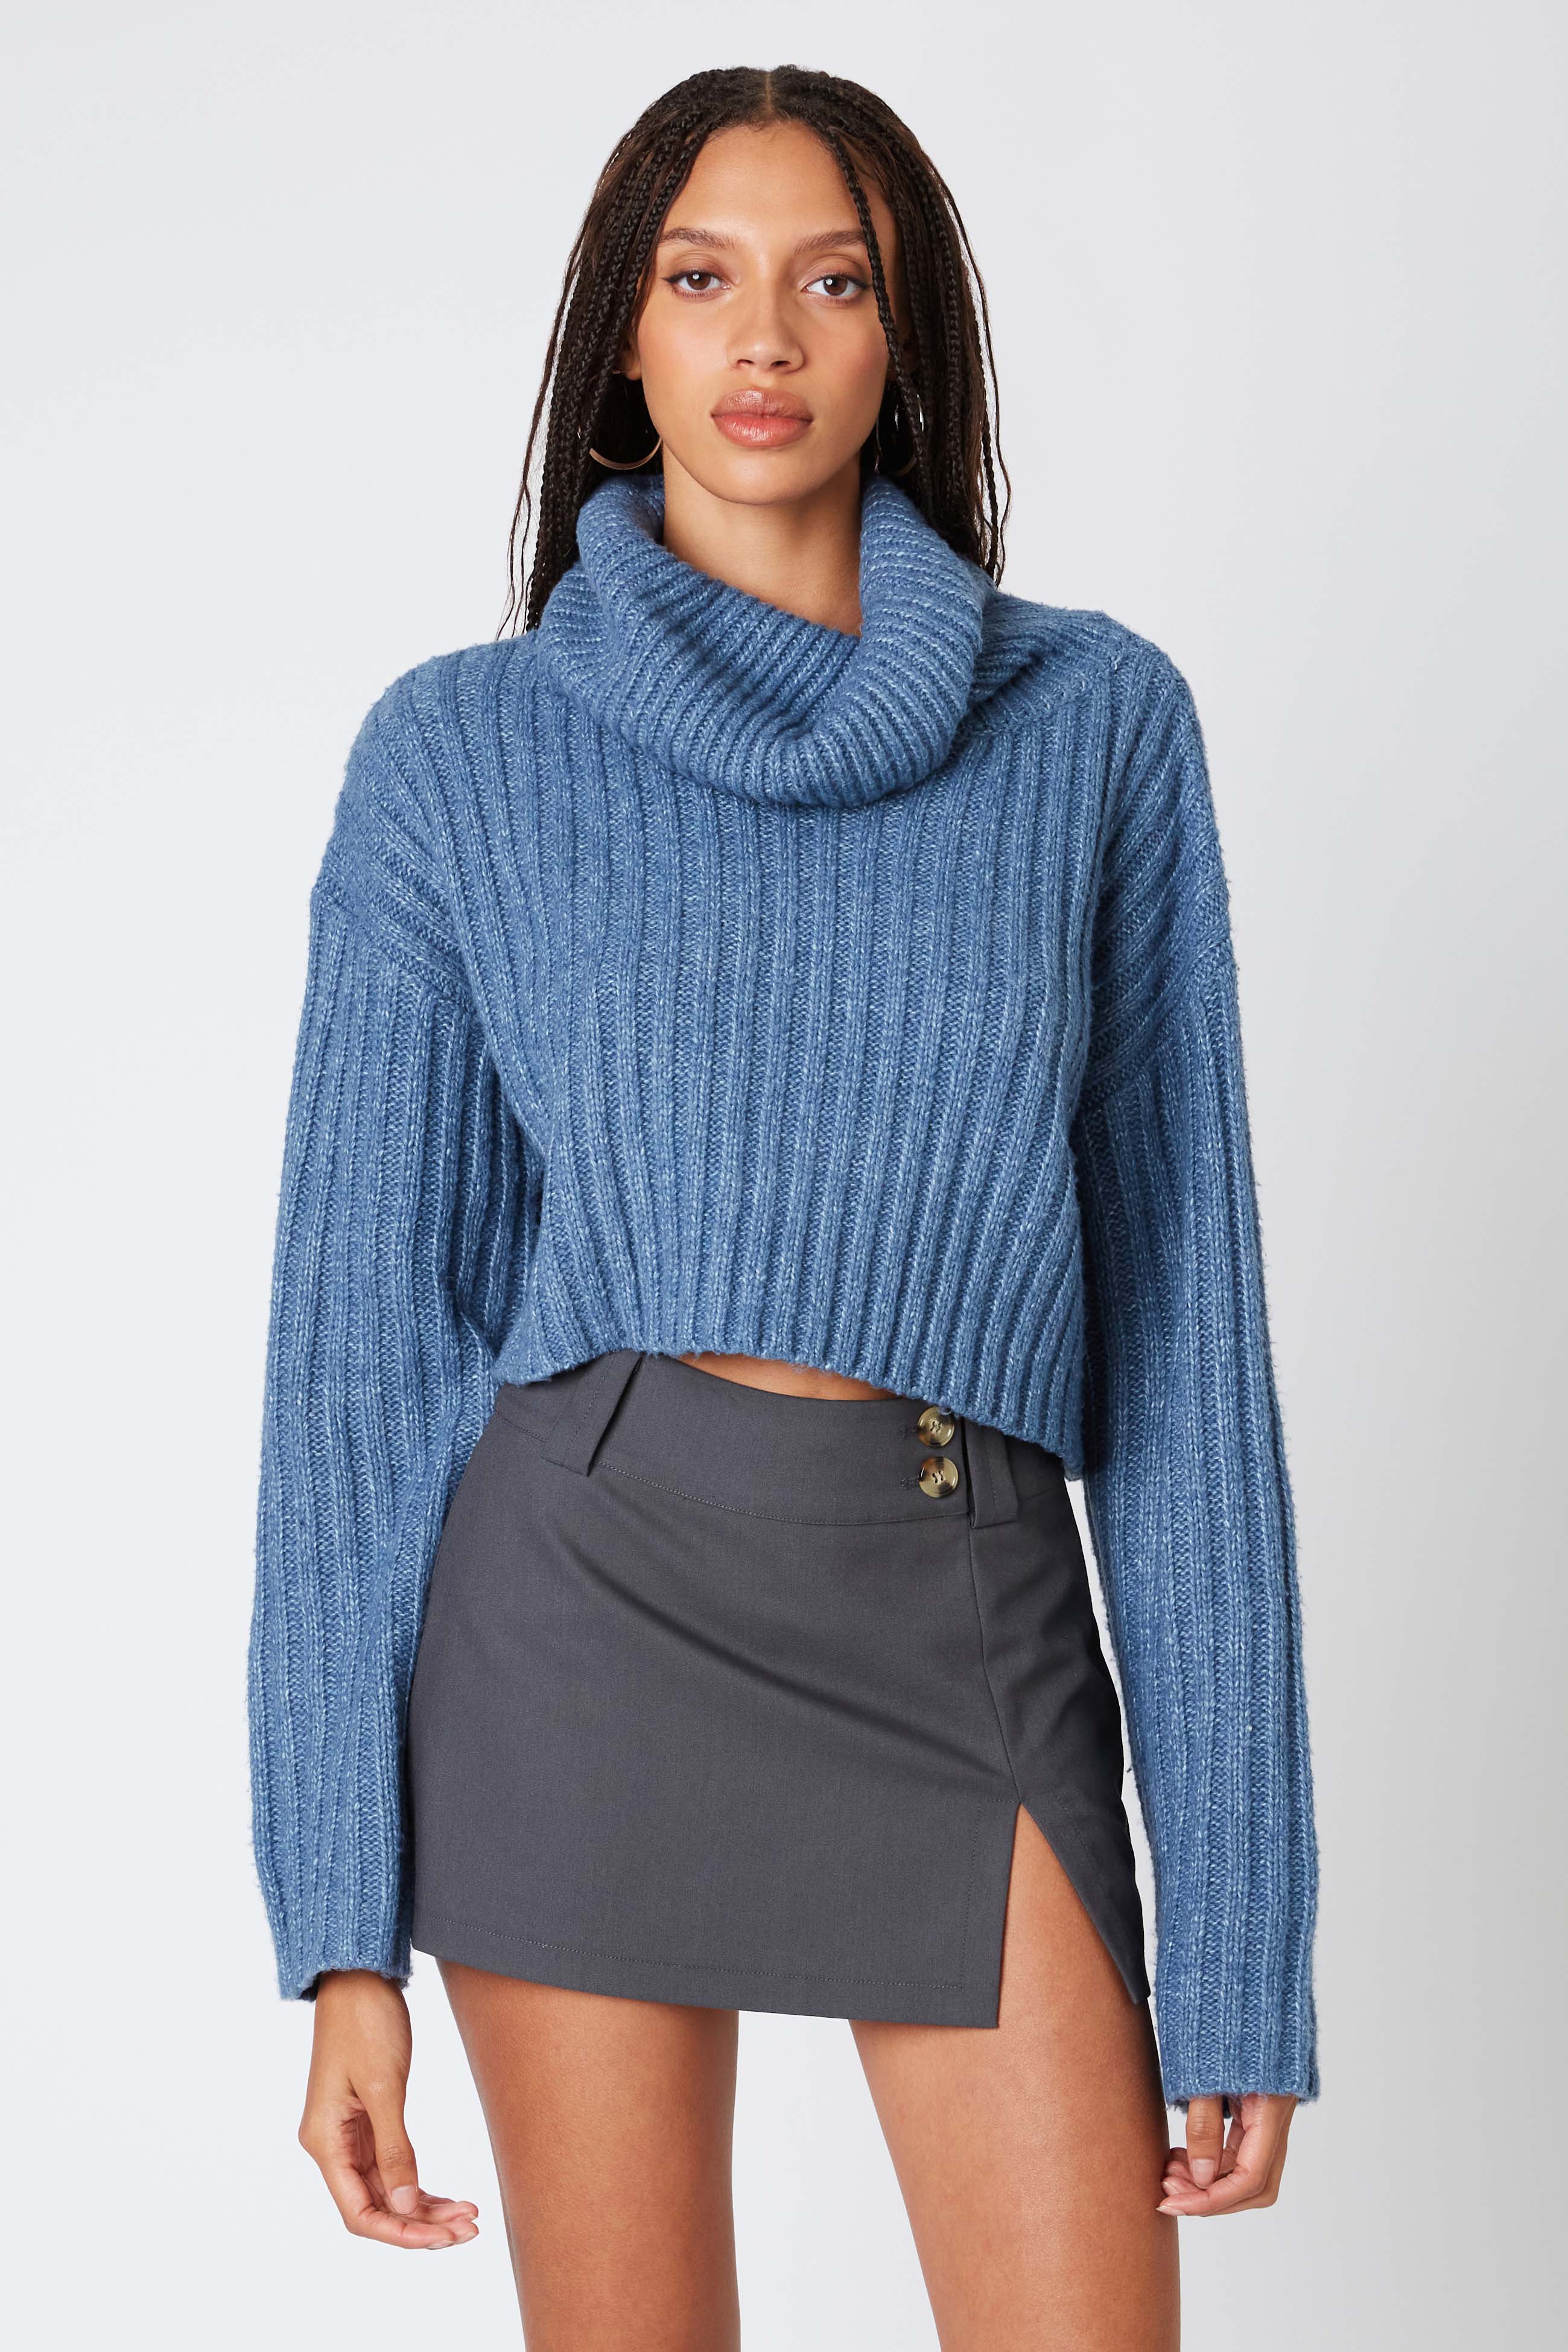 Cropped Turtleneck Sweater in Denim Front View